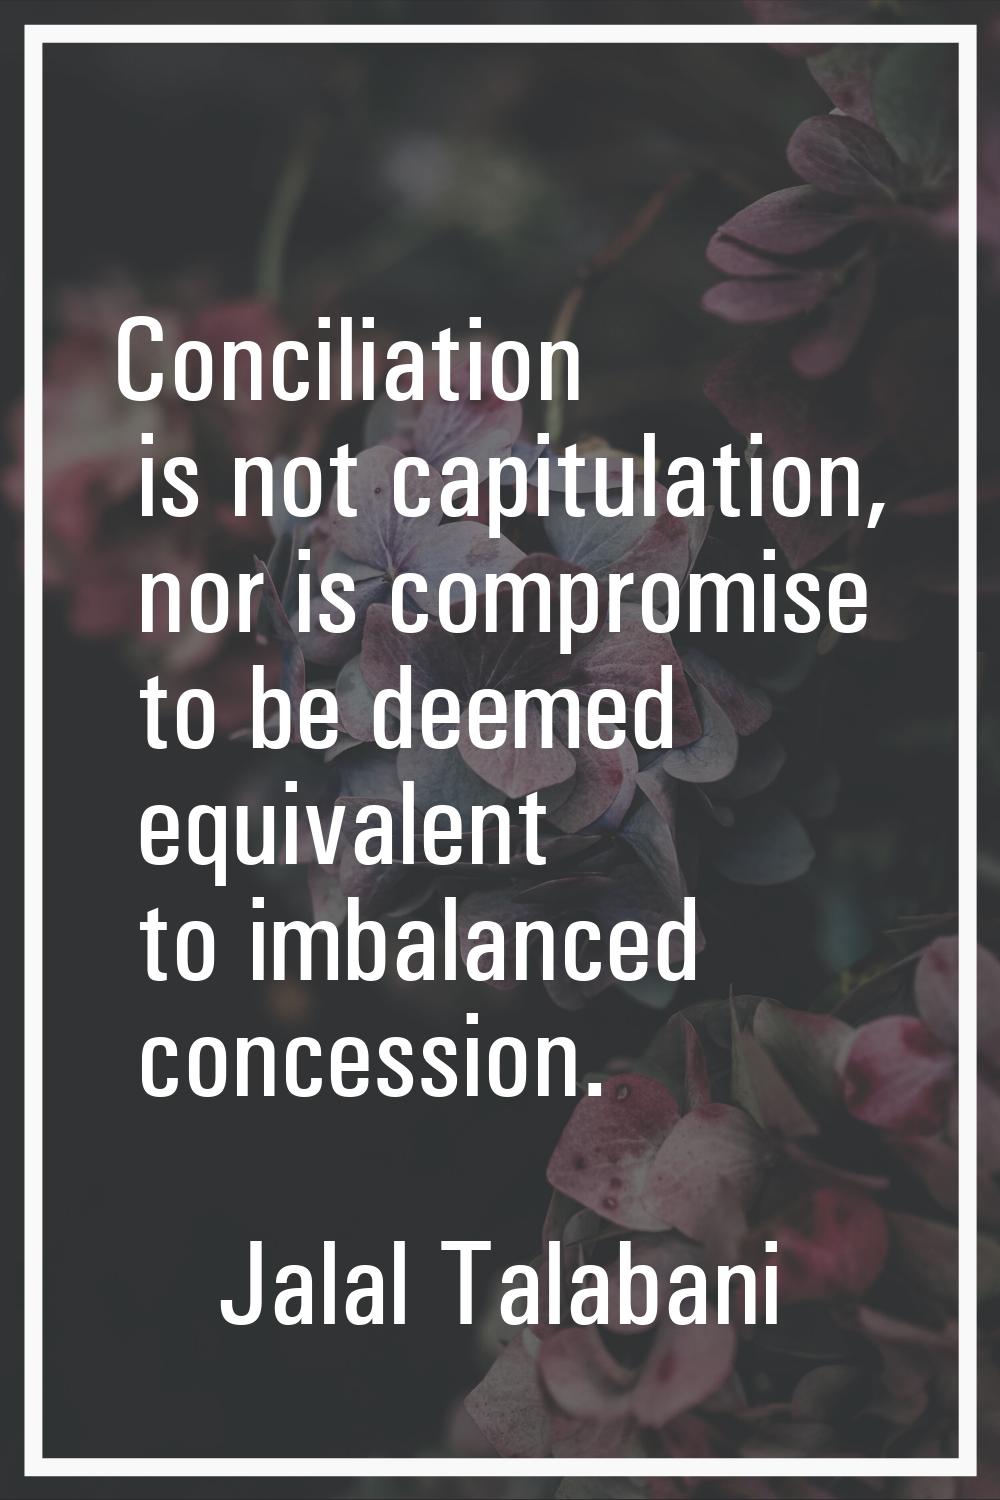 Conciliation is not capitulation, nor is compromise to be deemed equivalent to imbalanced concessio